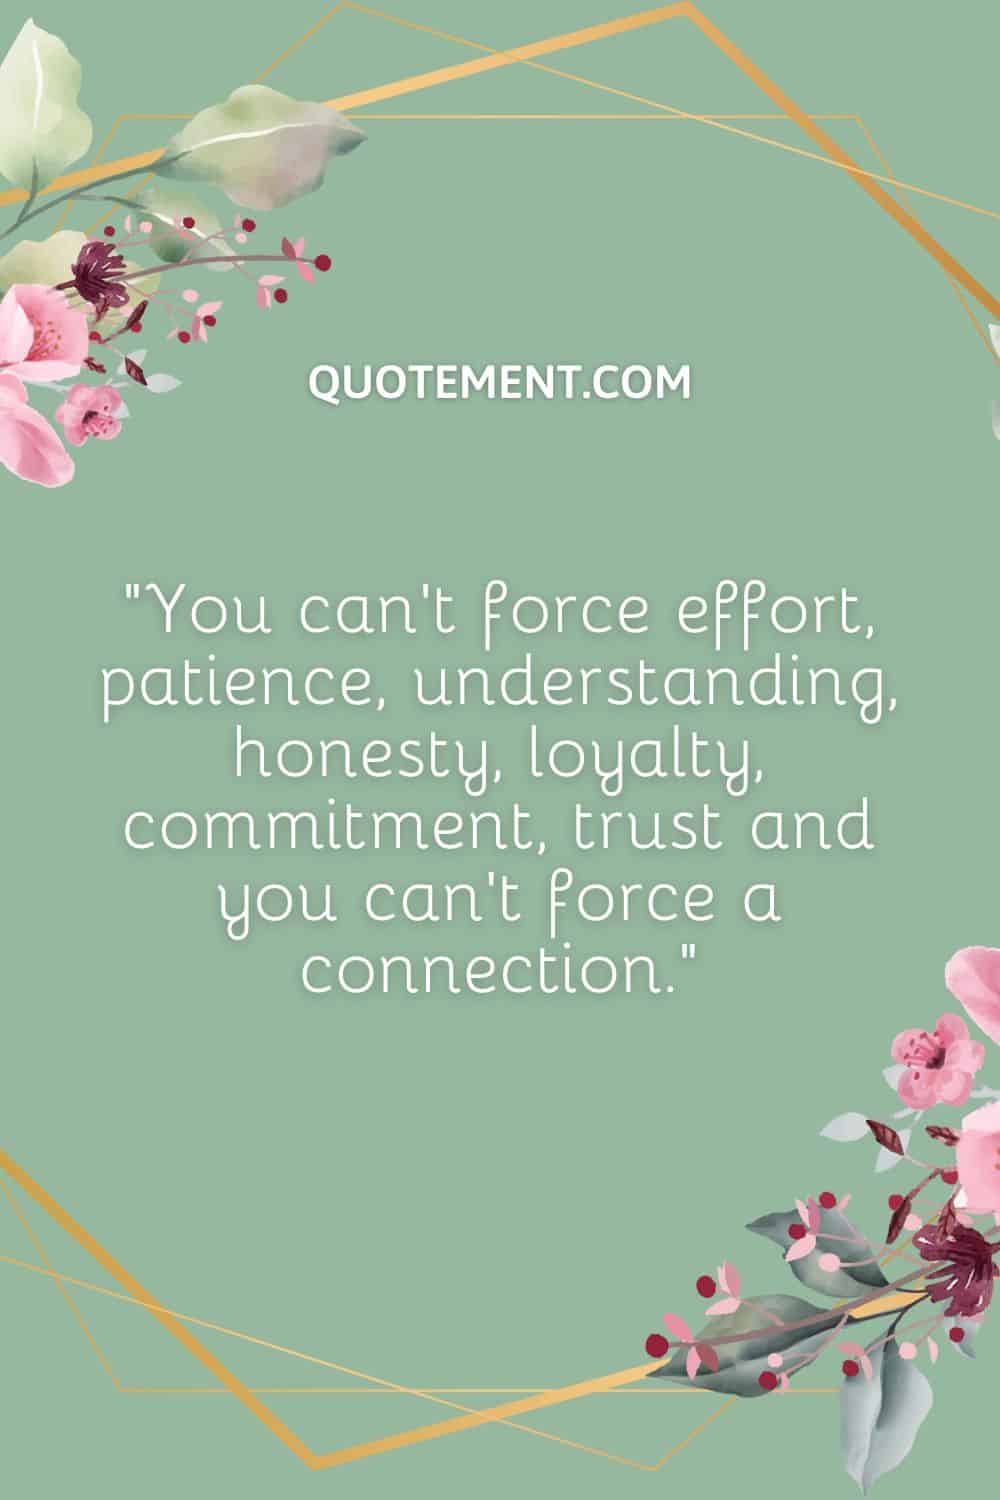 You can’t force effort, patience, understanding, honesty, loyalty, commitment, trust and you can’t force a connection